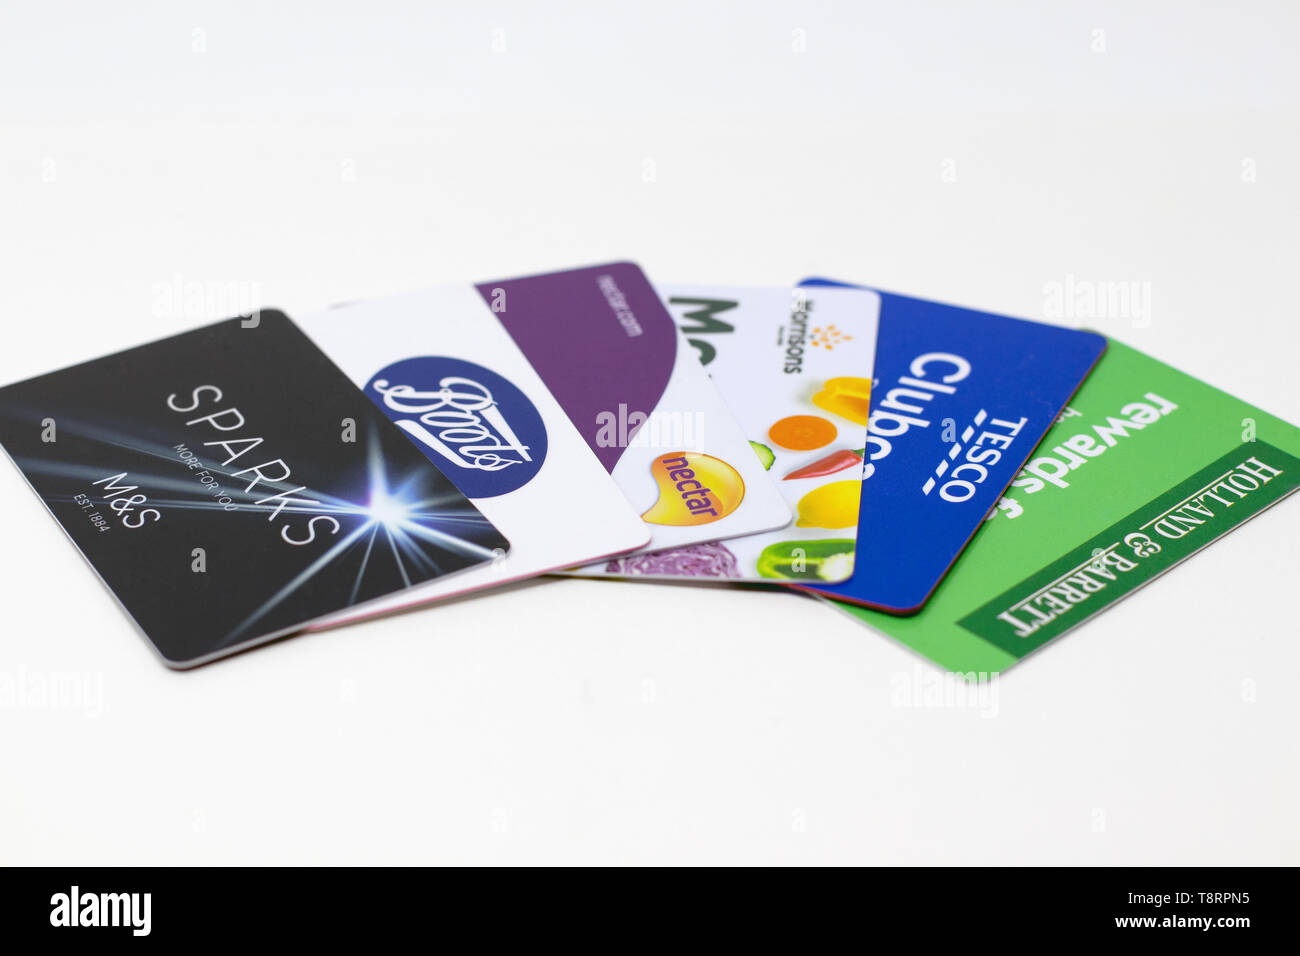 London, UK - 14th May 2019 - Collection of customer loyalty cards from Boots, Sainsbury's, Marks & Spencer, Holland & Barrett, Morrisons and Tesco sup Stock Photo